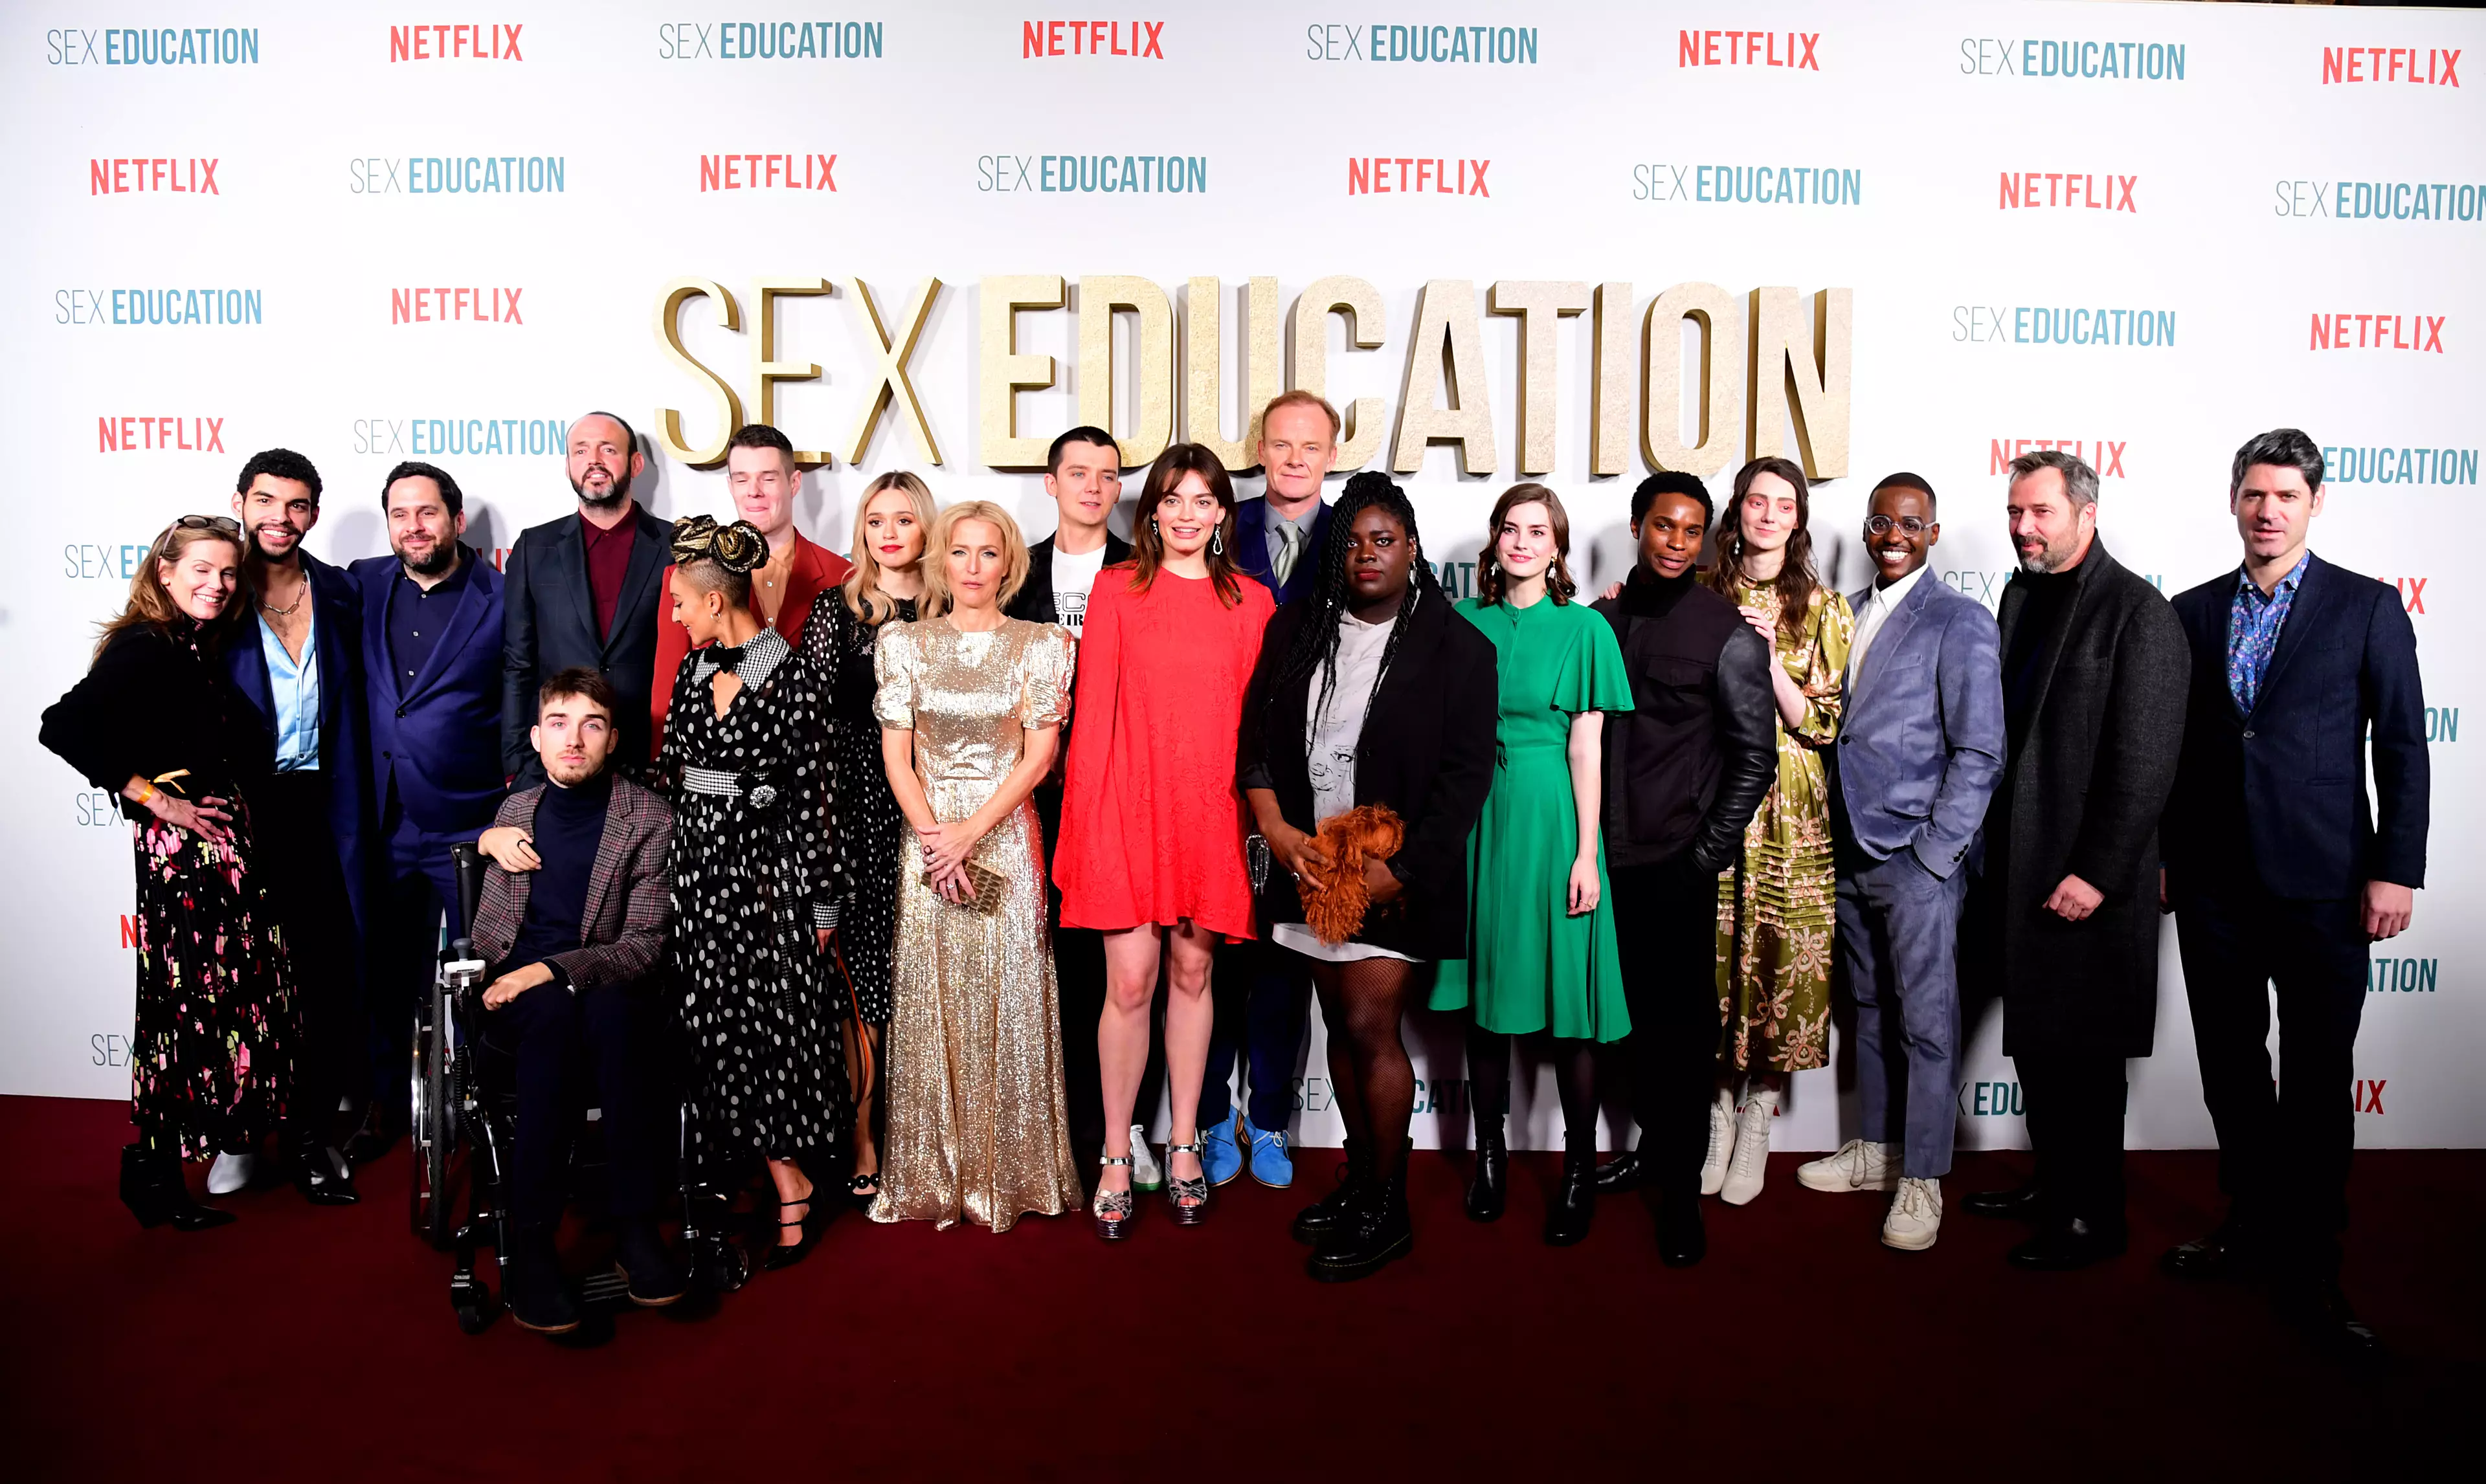 The cast of 'Sex Education' at the season 2 premiere (